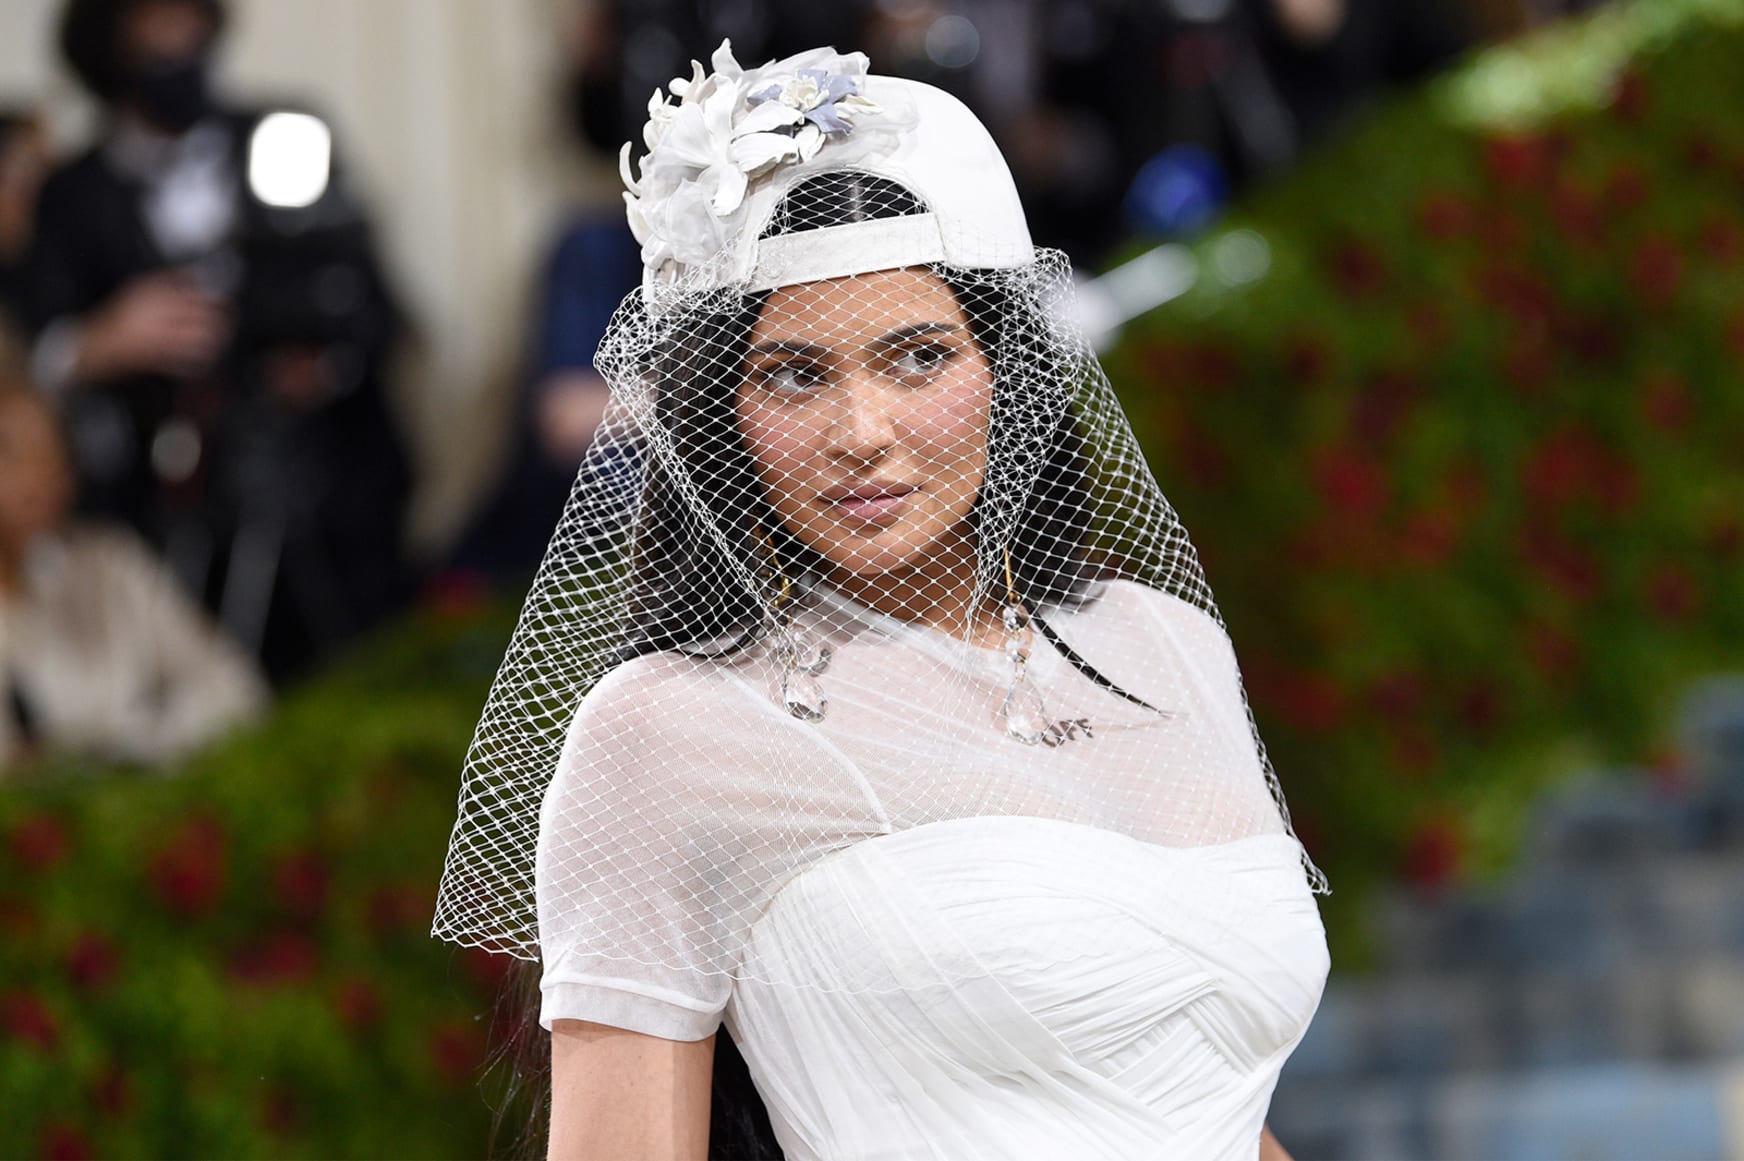 Kylie Jenner gave her bridal gown a streetwear twist with a veil covering her backwards baseball cap. The outfit was designed by Off-White's late founder Virgil Abloh.